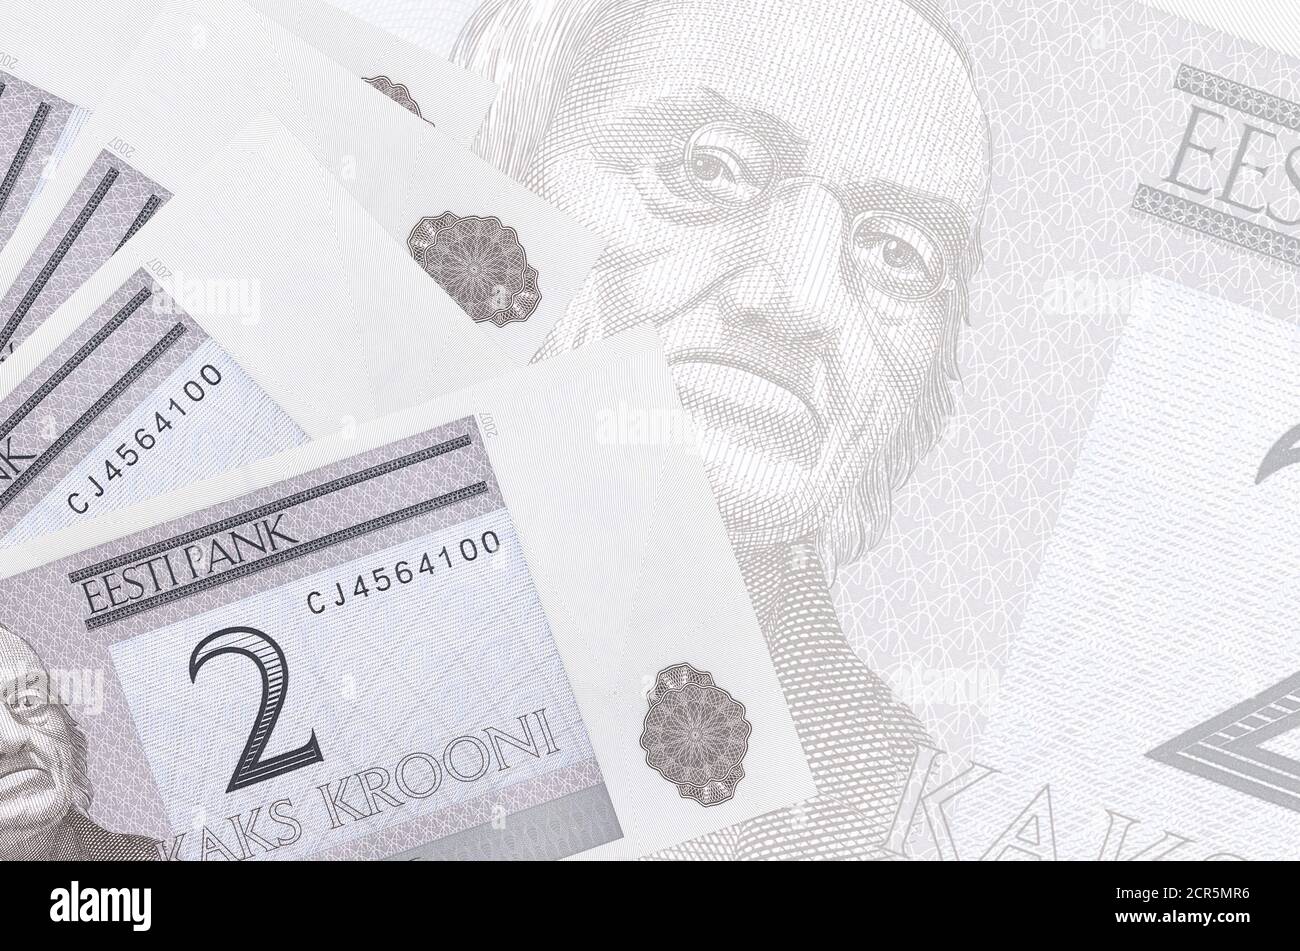 2 Estonian kroon bills lies in stack on background of big semi-transparent banknote. Abstract business background with copy space Stock Photo